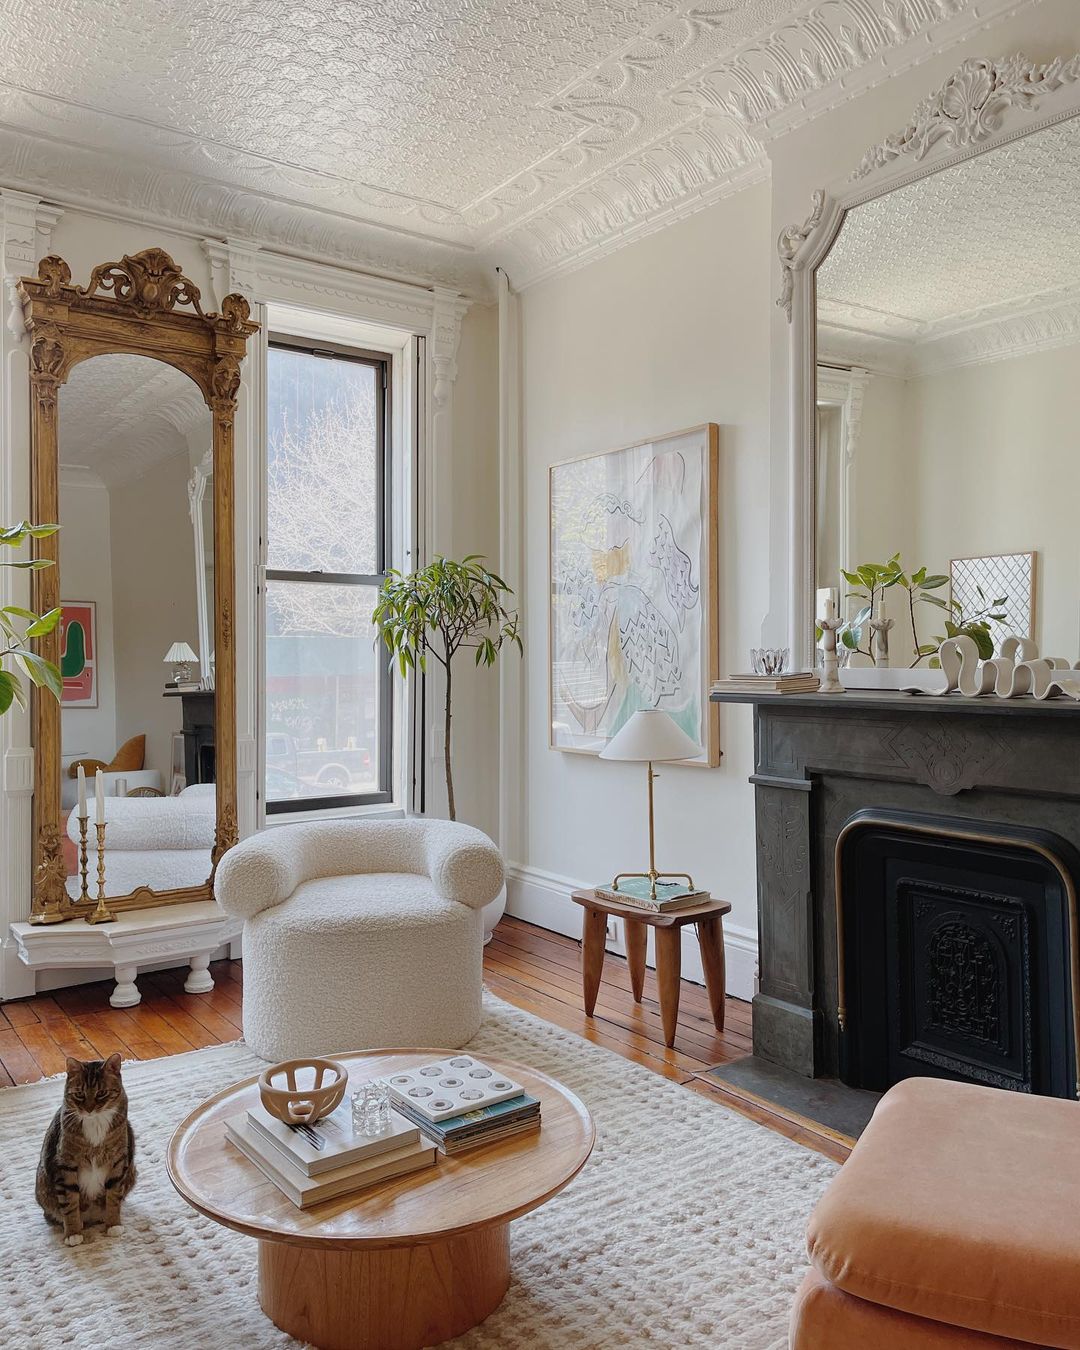 Décor Inspiration: A Bright & Airy Brooklyn Apartment with Gilded Mirrors and a Pink Mario Bellini Sofa